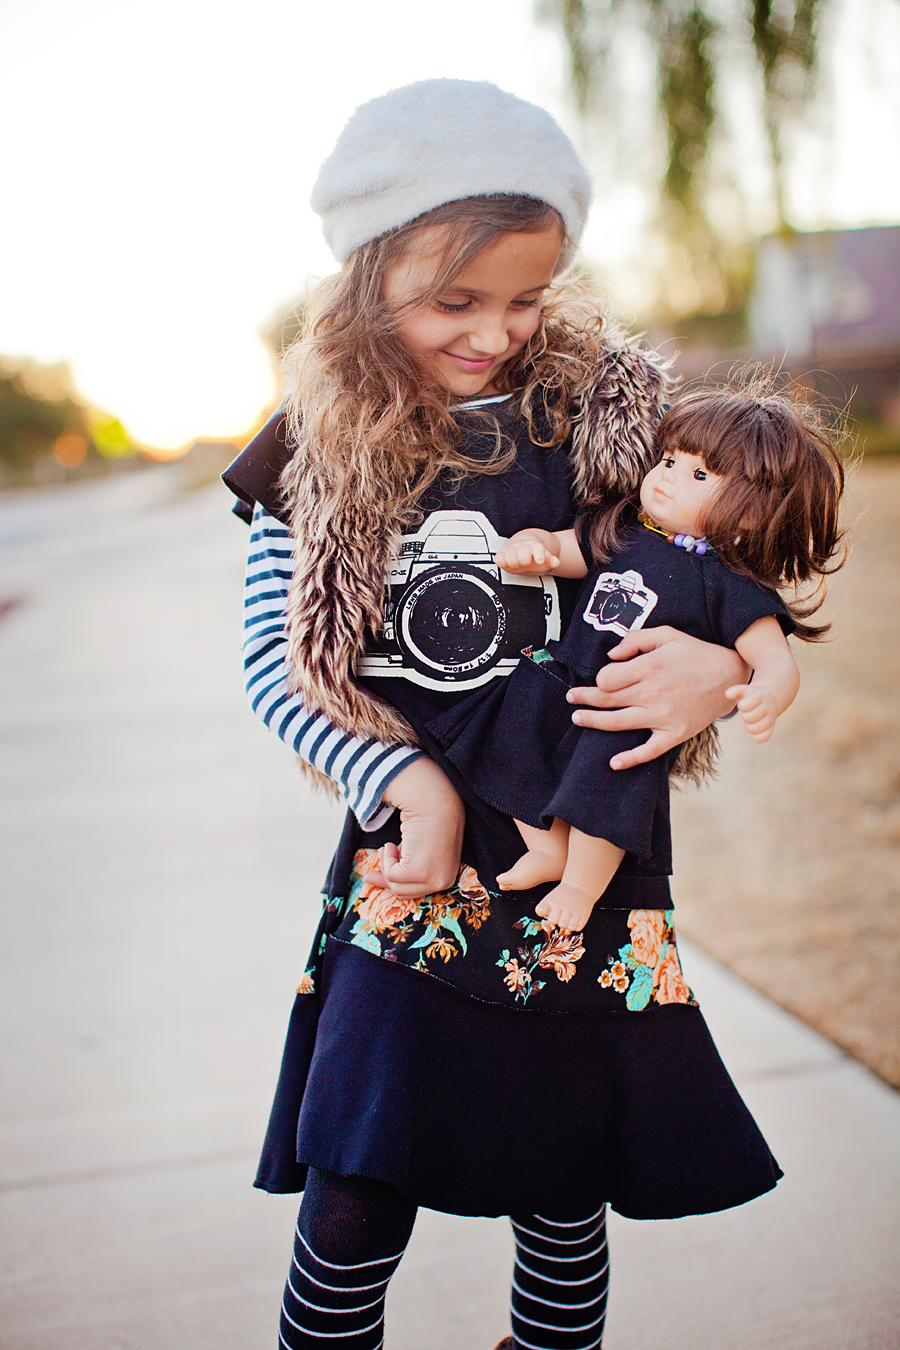 Matching girl and doll clothing. Photography by Laura Winslow Photography via lilblueboo.com